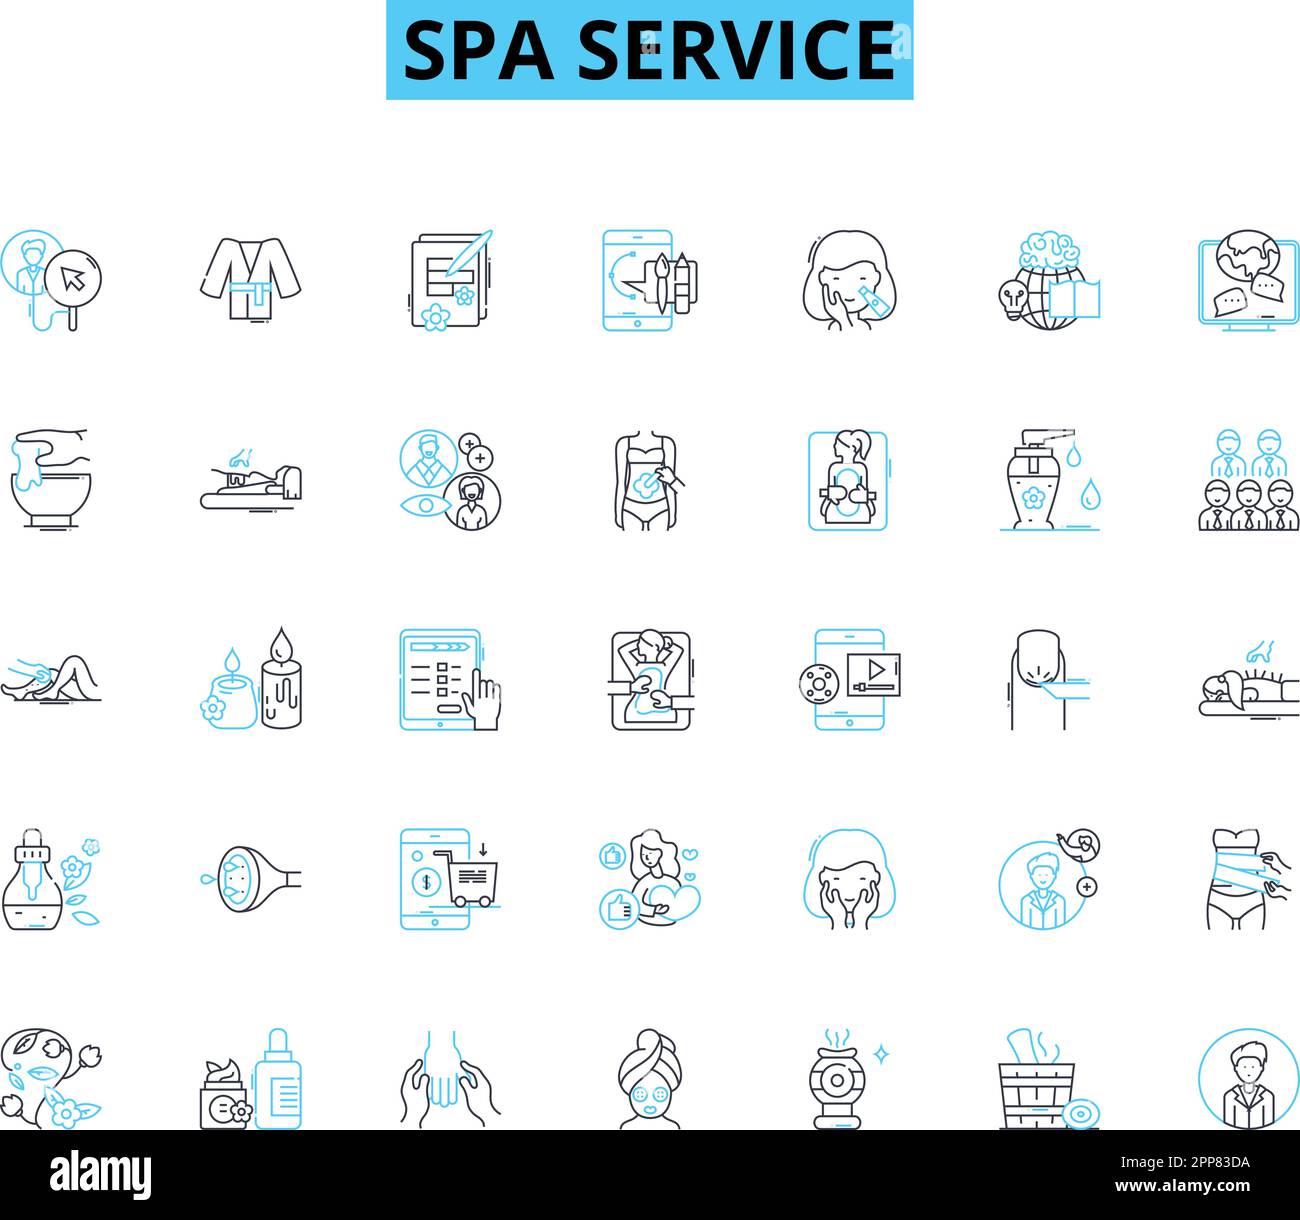 Spa service linear icons set. Relaxation, Pampering, Rejuvenation, Serenity, Therapy, Bliss, Tranquility line vector and concept signs. Massage,Health Stock Vector